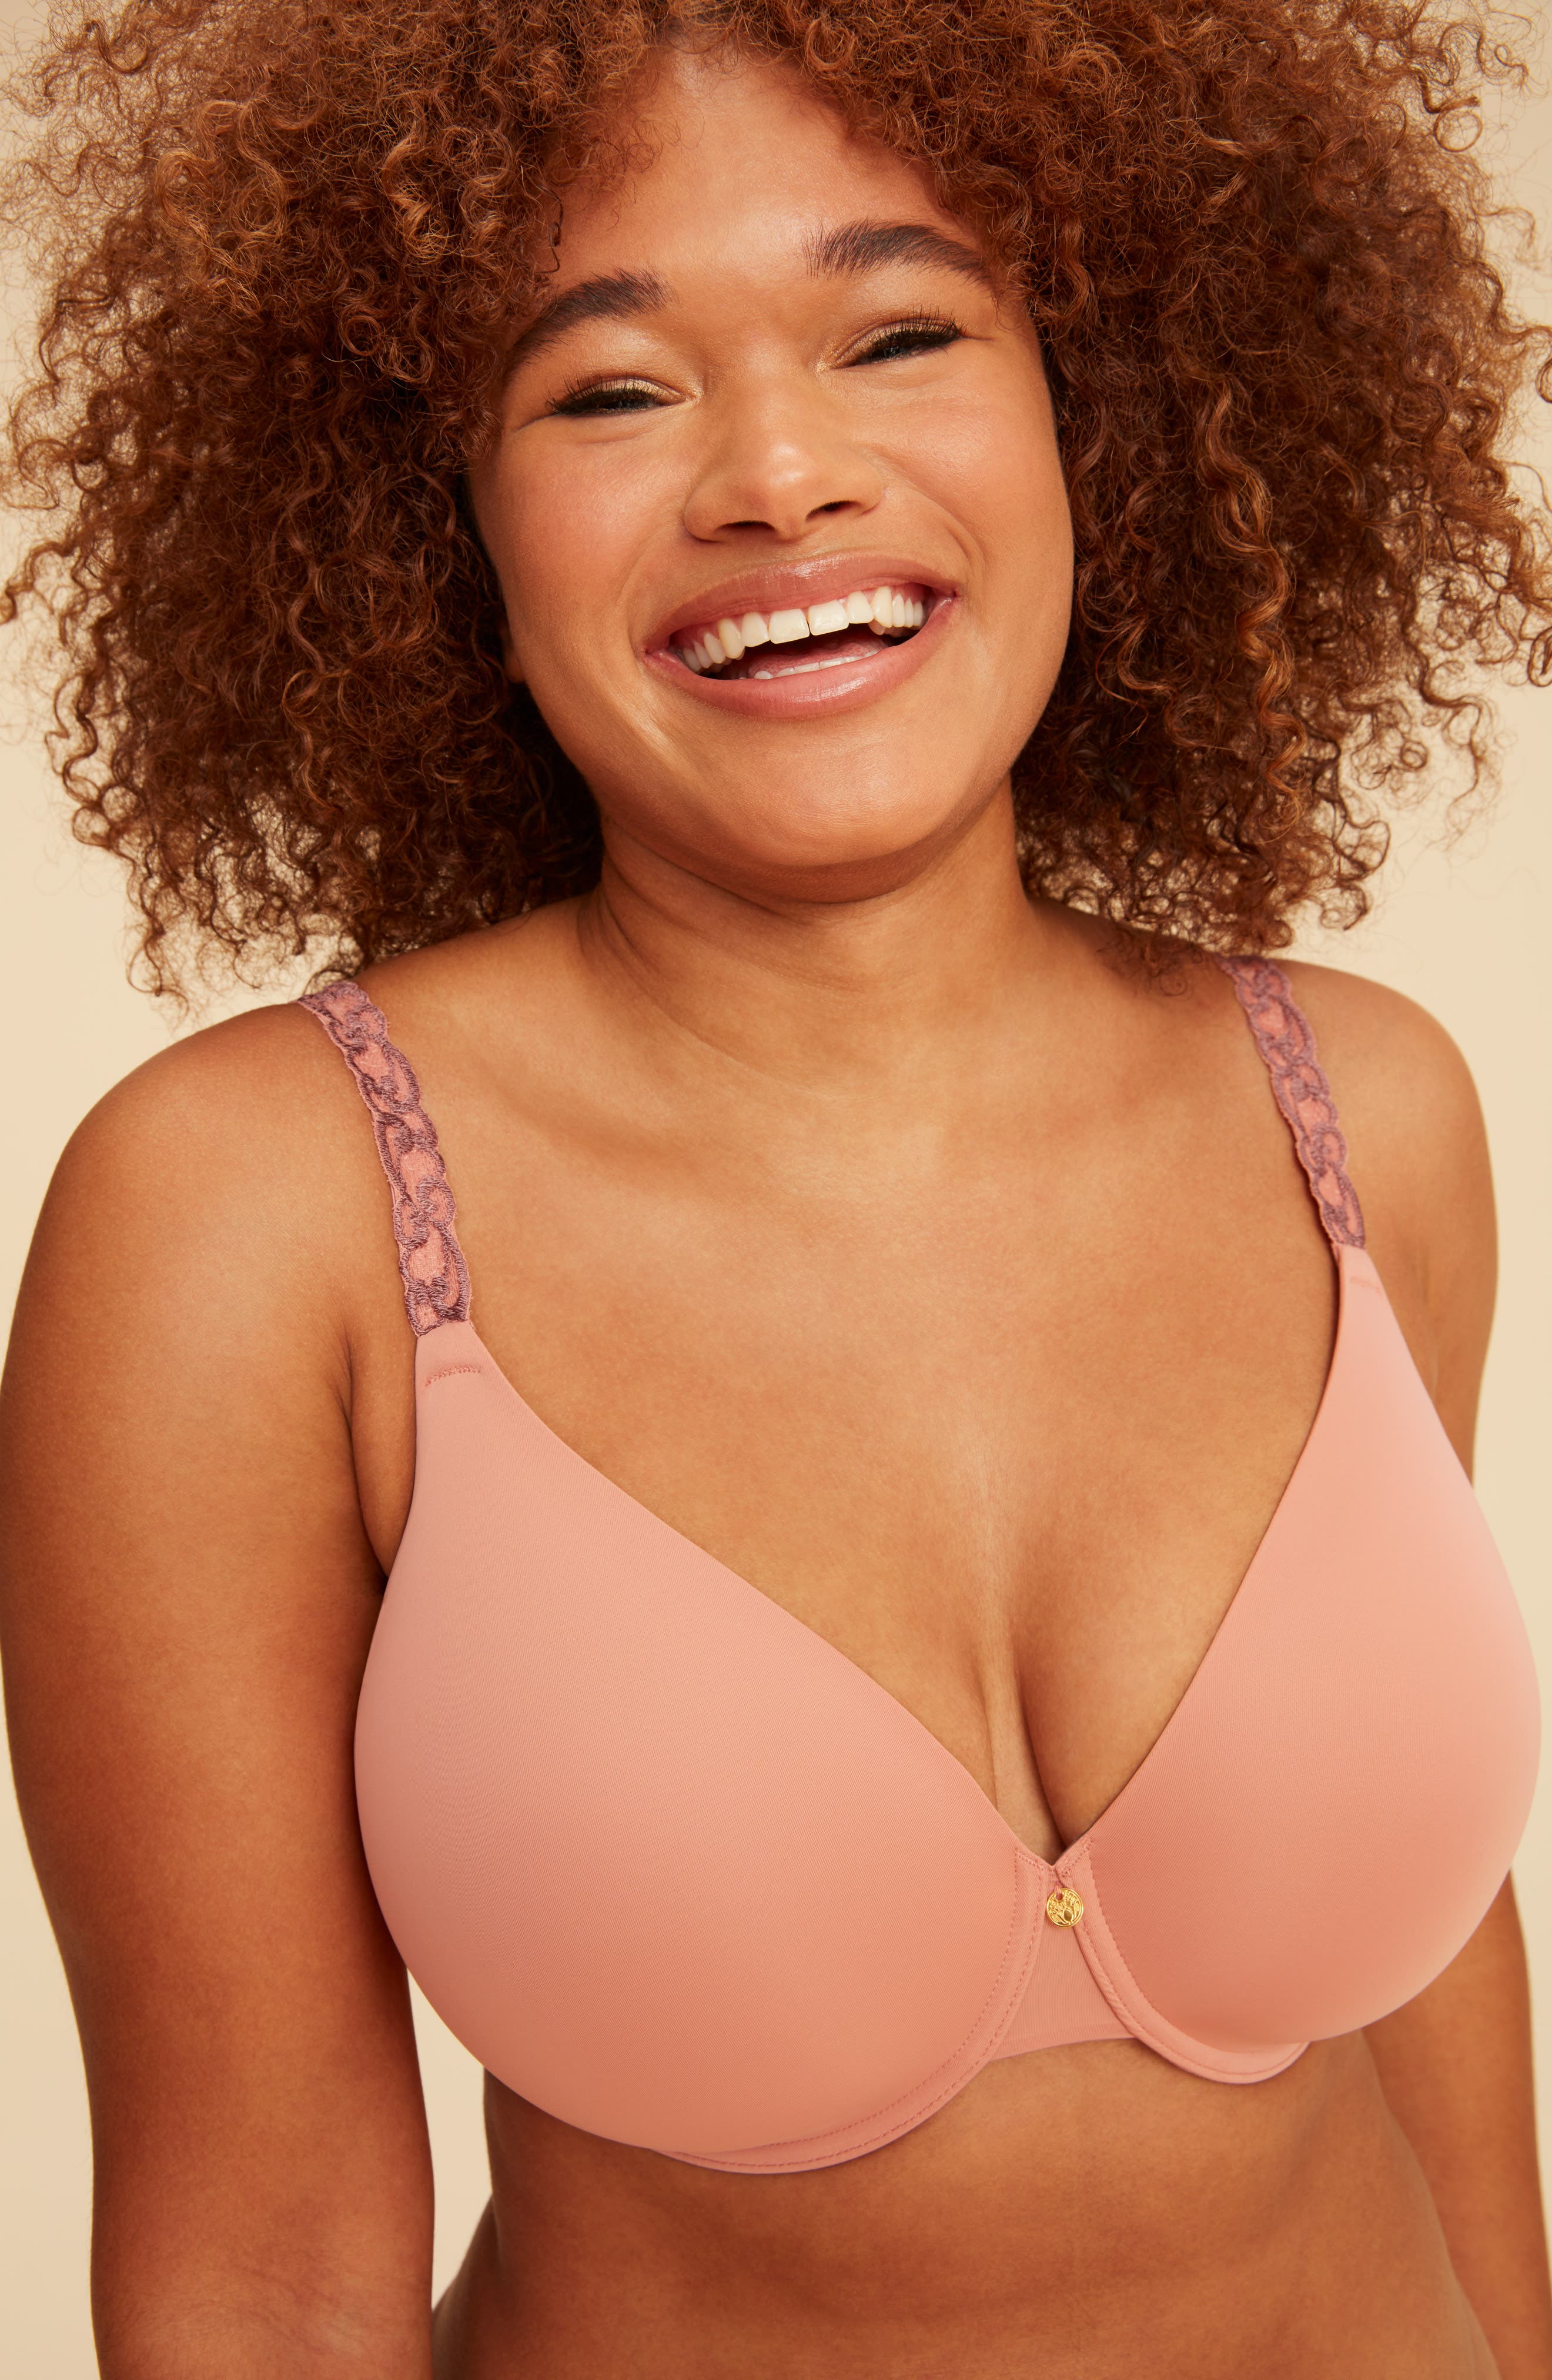 Types Of Bras - Different Bra Styles Every Person Should Know – Plunge,  T-Shirt, Demi & Balconette Bra Differences – ThirdLove